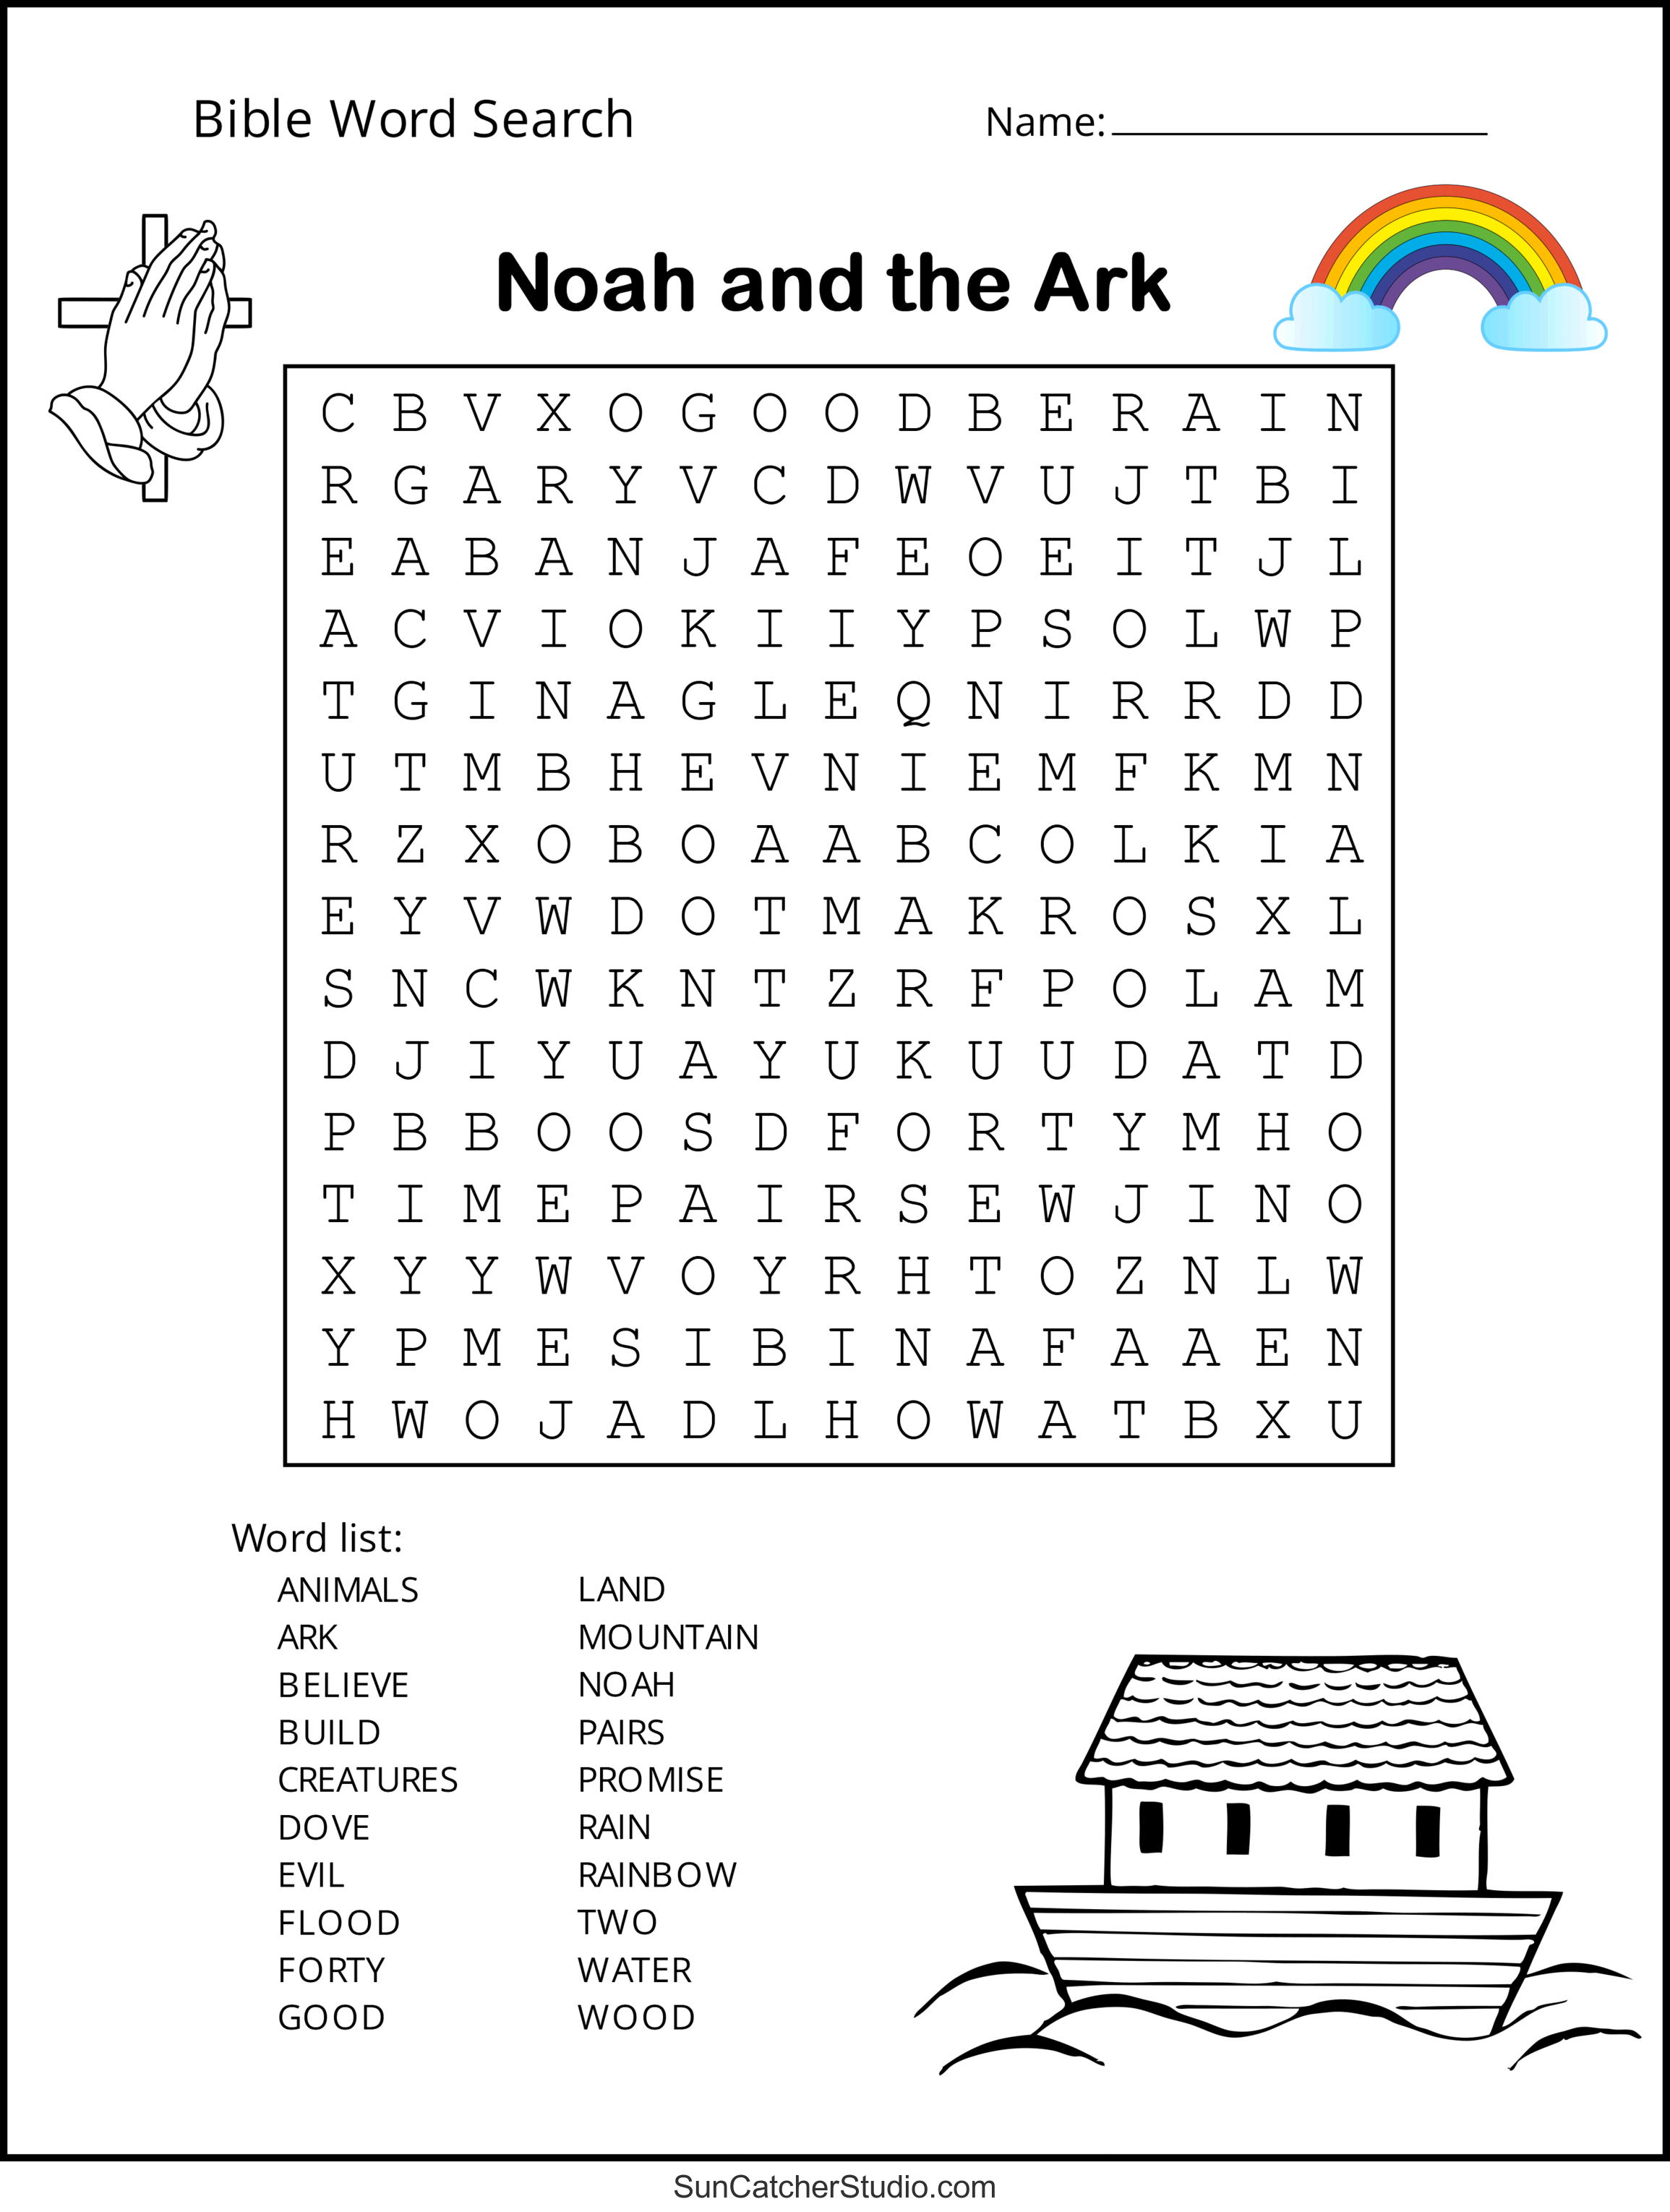 Bible Word Search Free Printable Christian Puzzles DIY Projects Patterns Monograms